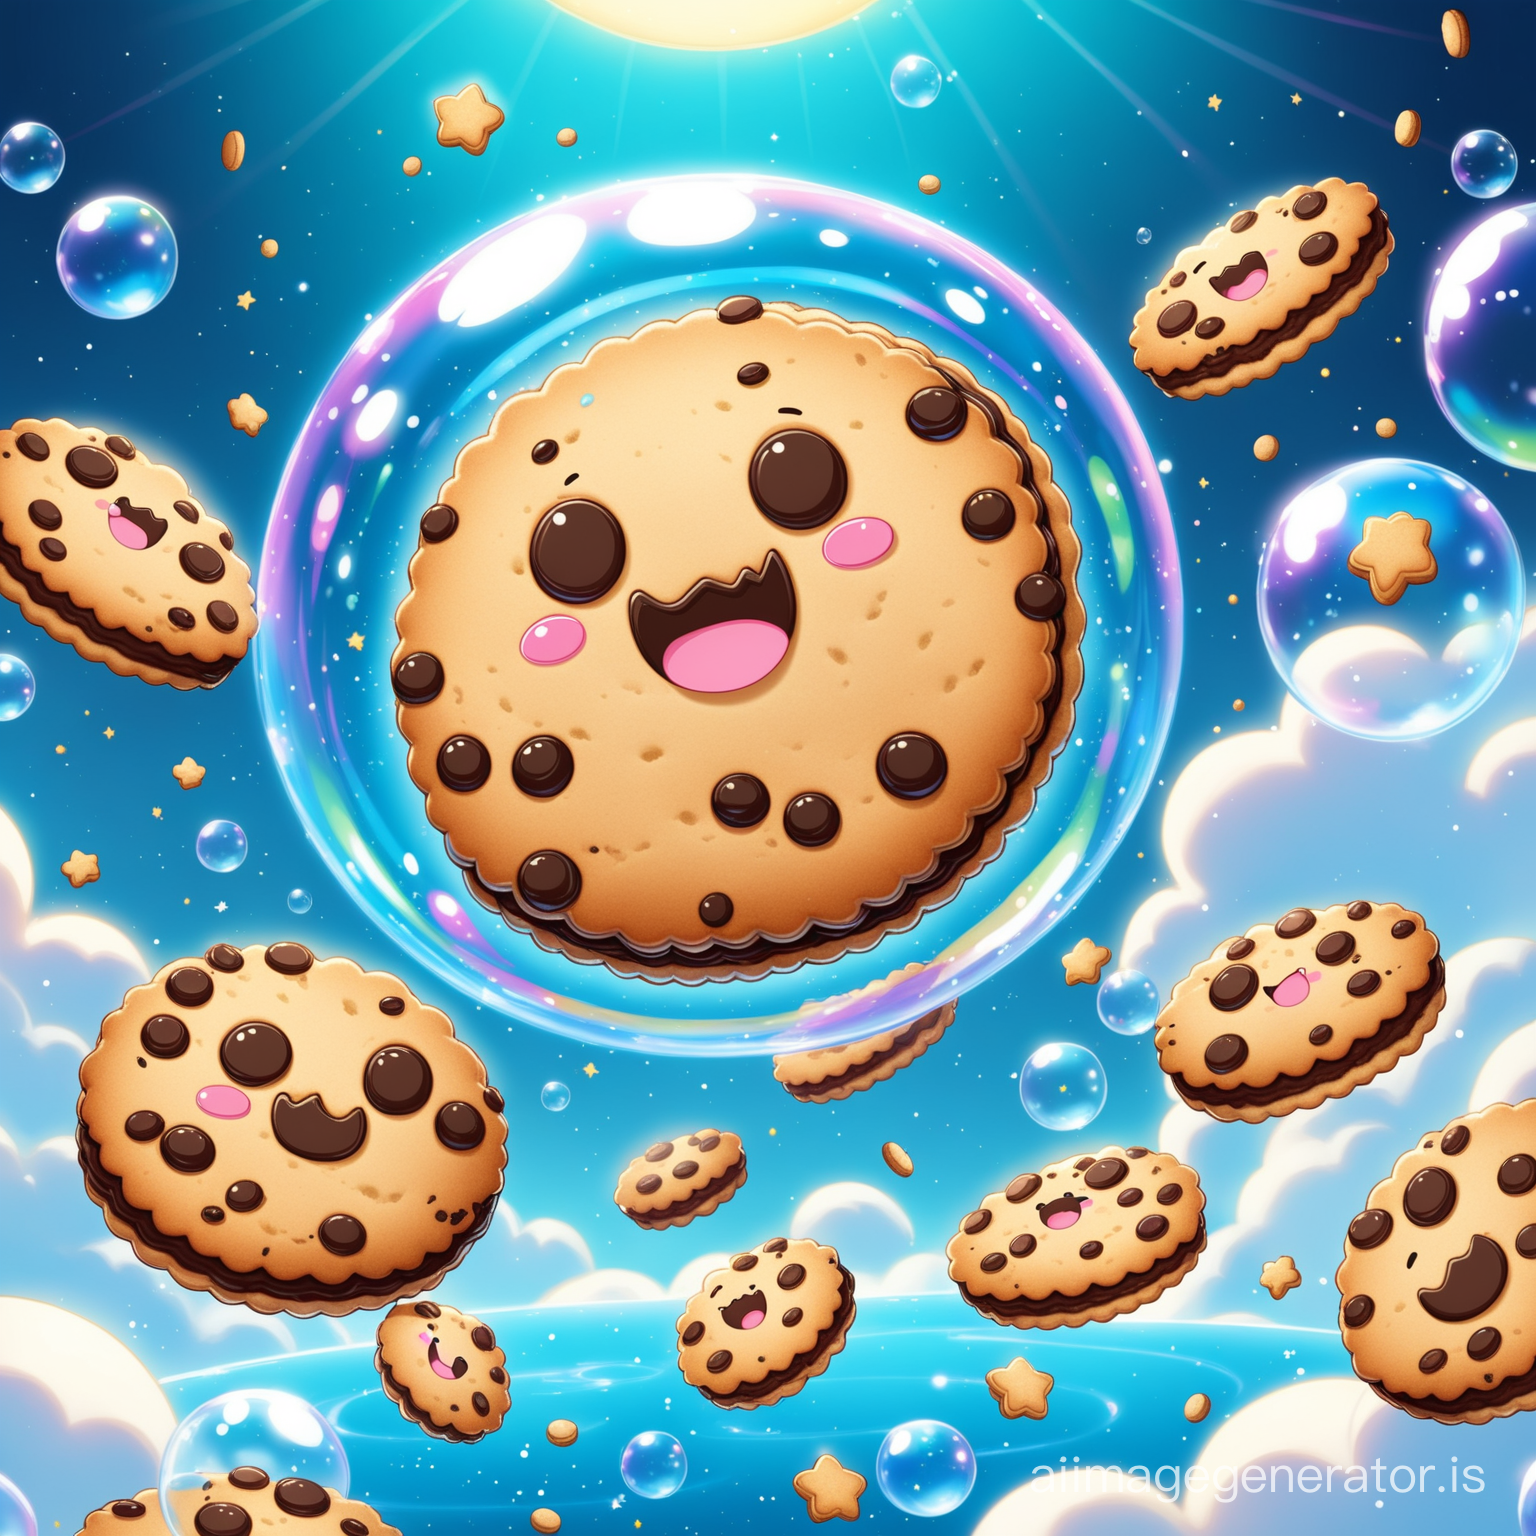 A little black happy cute cookie flying on the cookie jungle with super detail and High Quality
big and blue Bubble and floating cookie are seen everywhere
Details are evident beautifully and with great precision